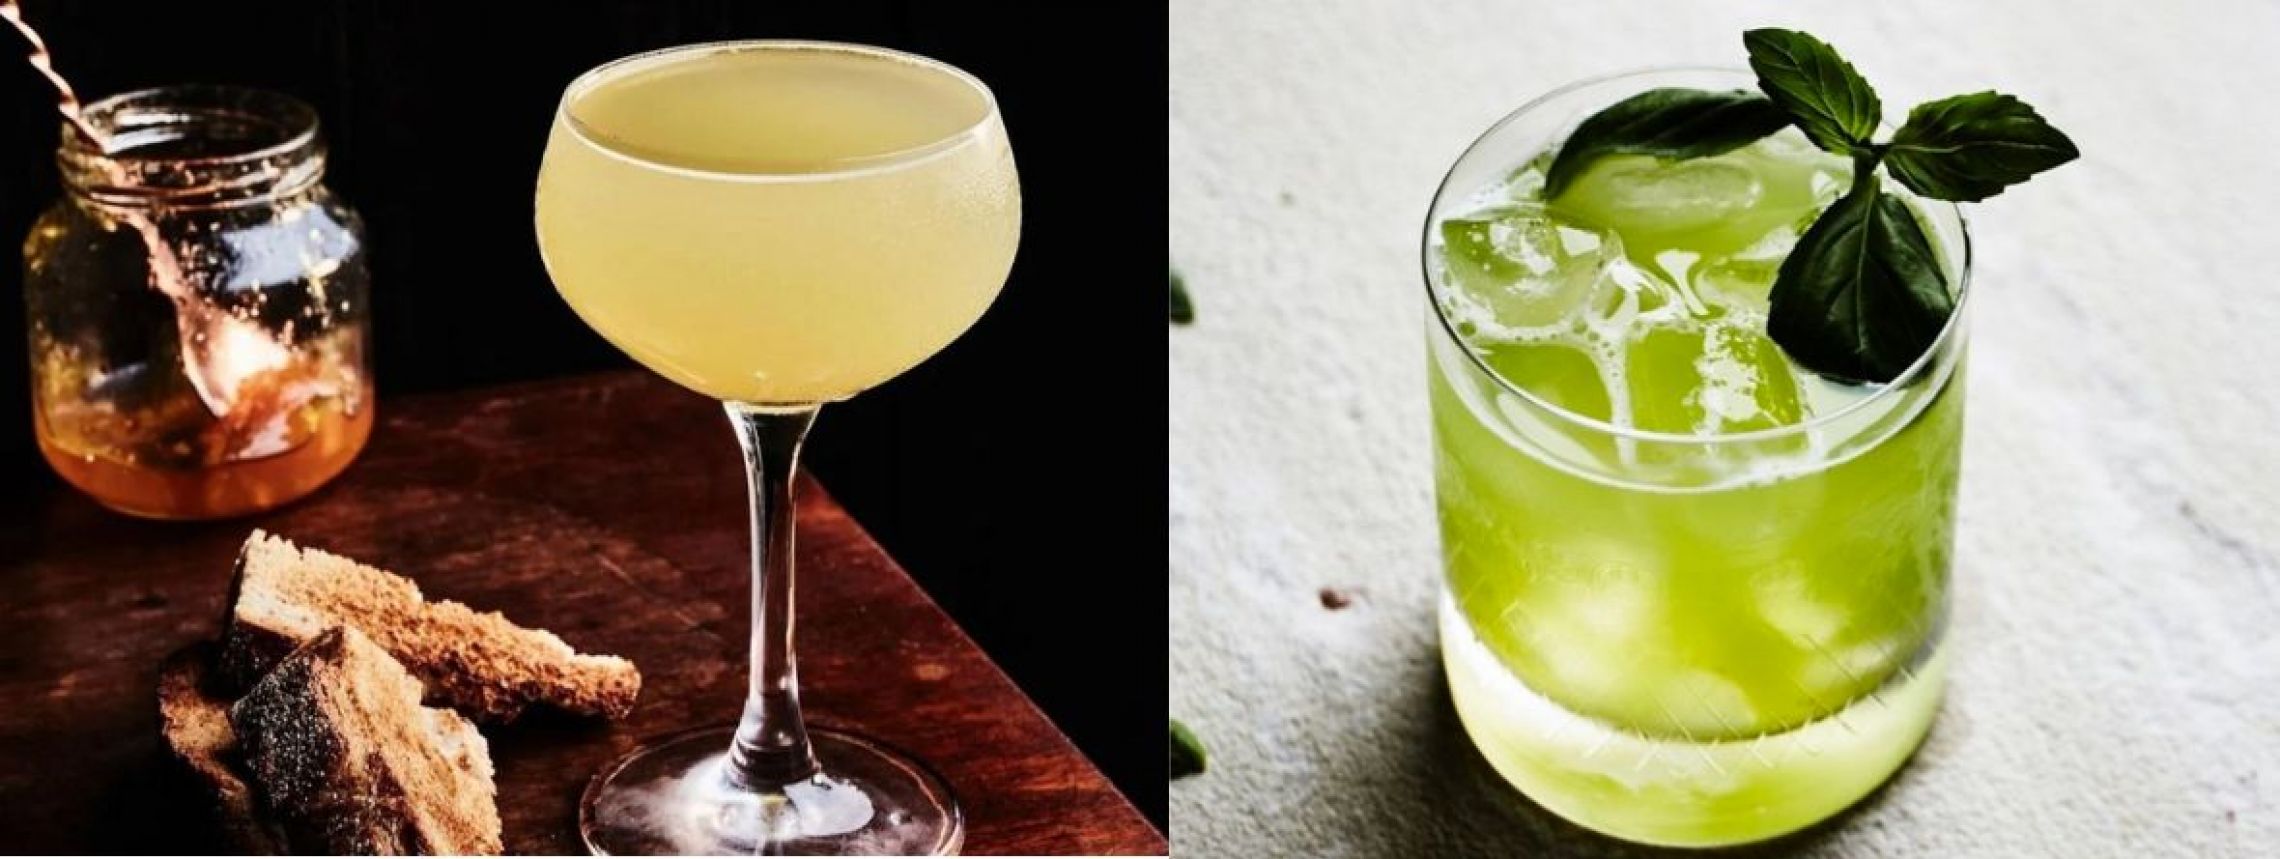 Entrants for the 2023 London Spirits Competition will be able to upload their cocktail recipes and images.